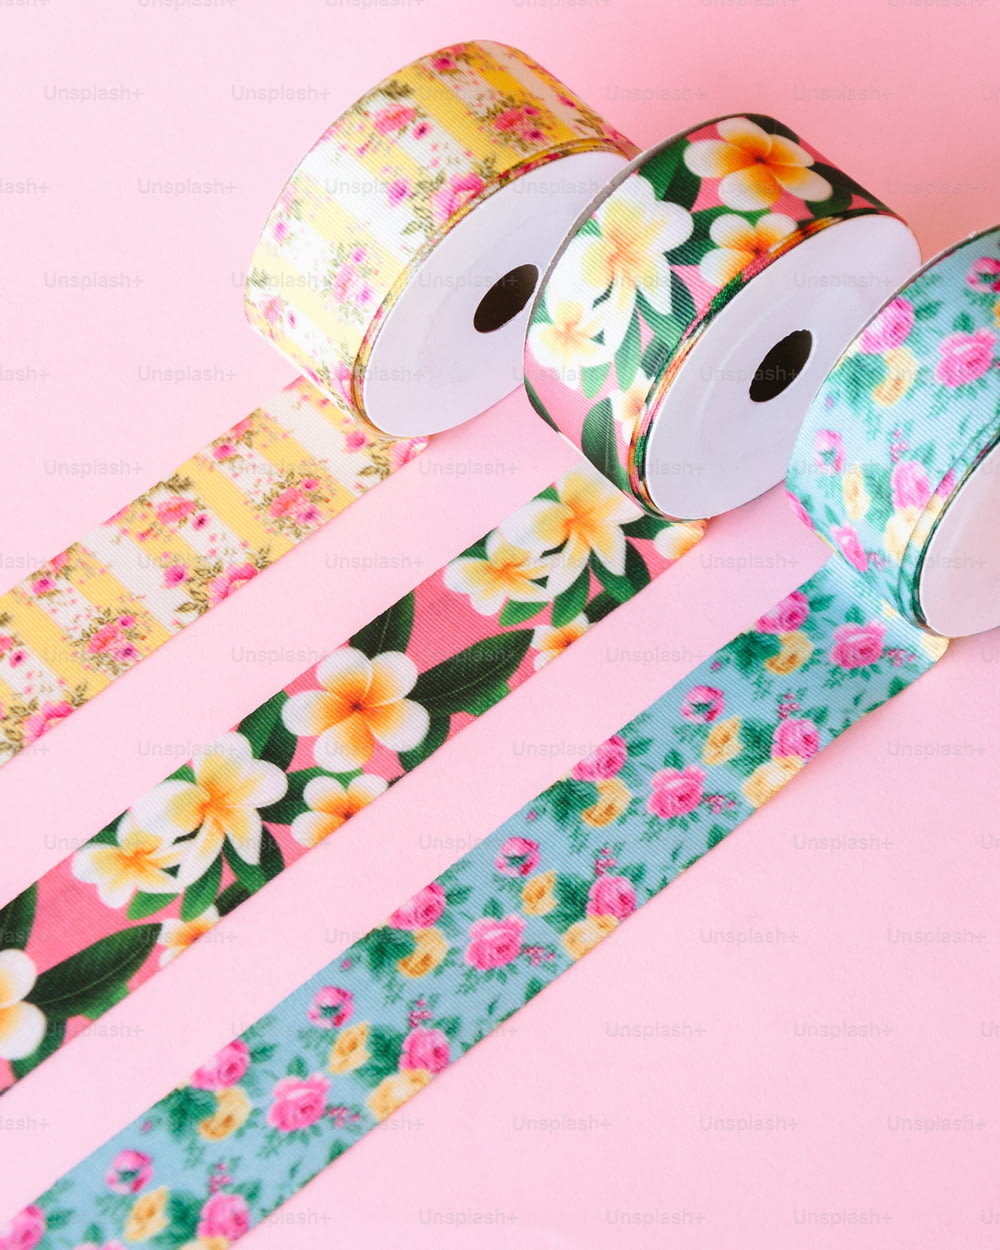 three rolls of floral washi tape on a pink background